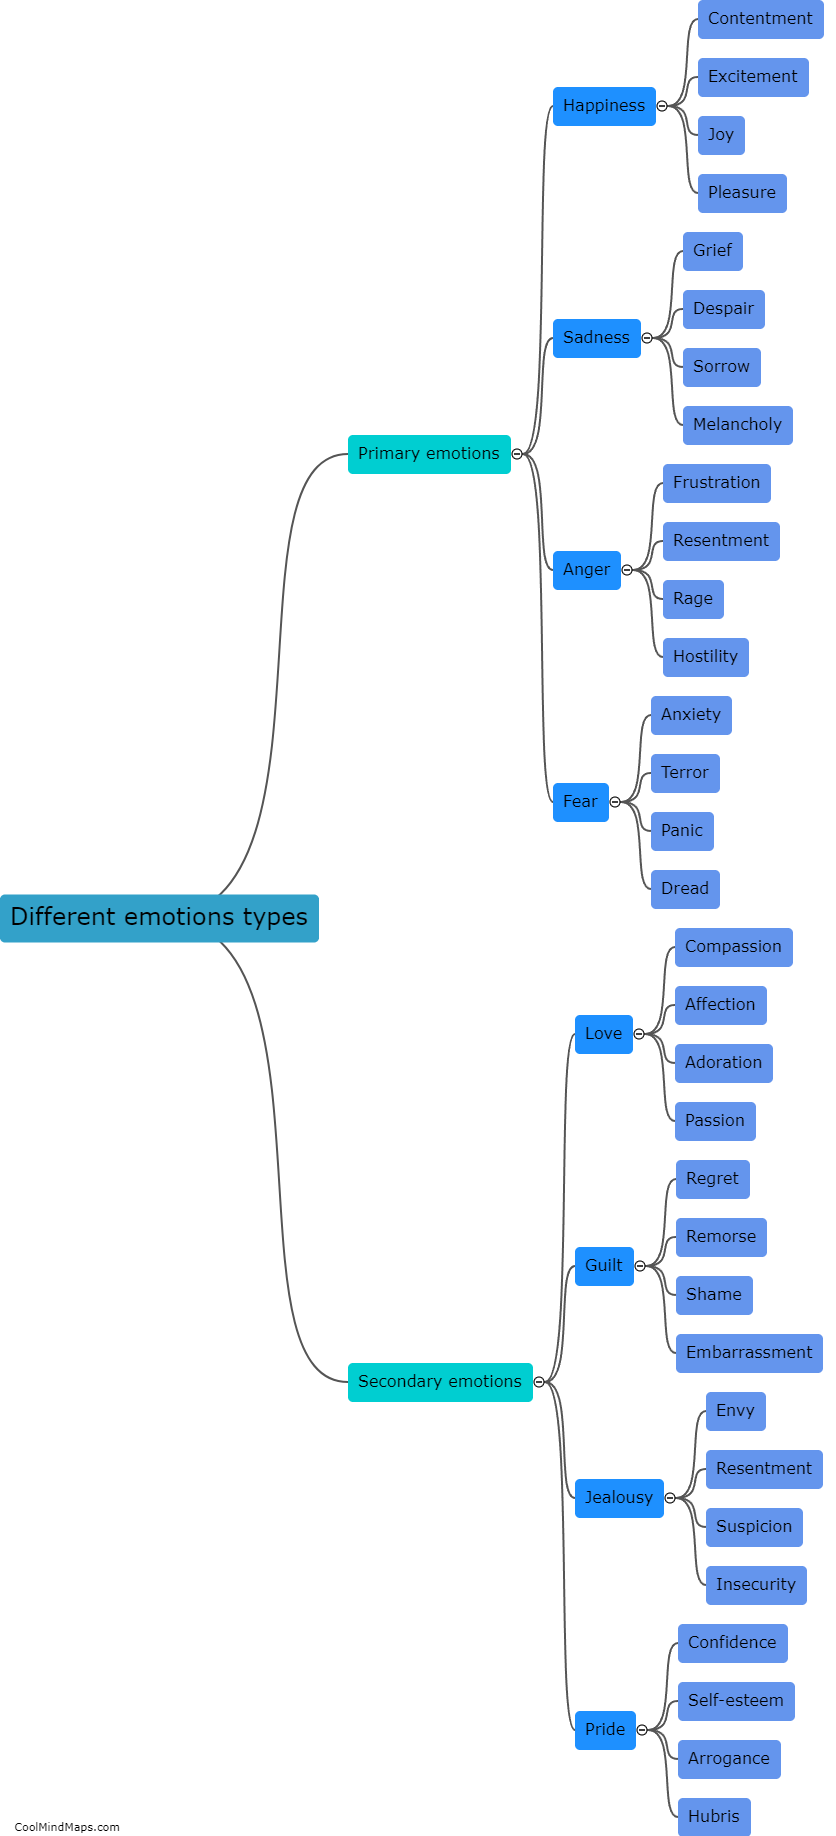 What are the different types of emotions?